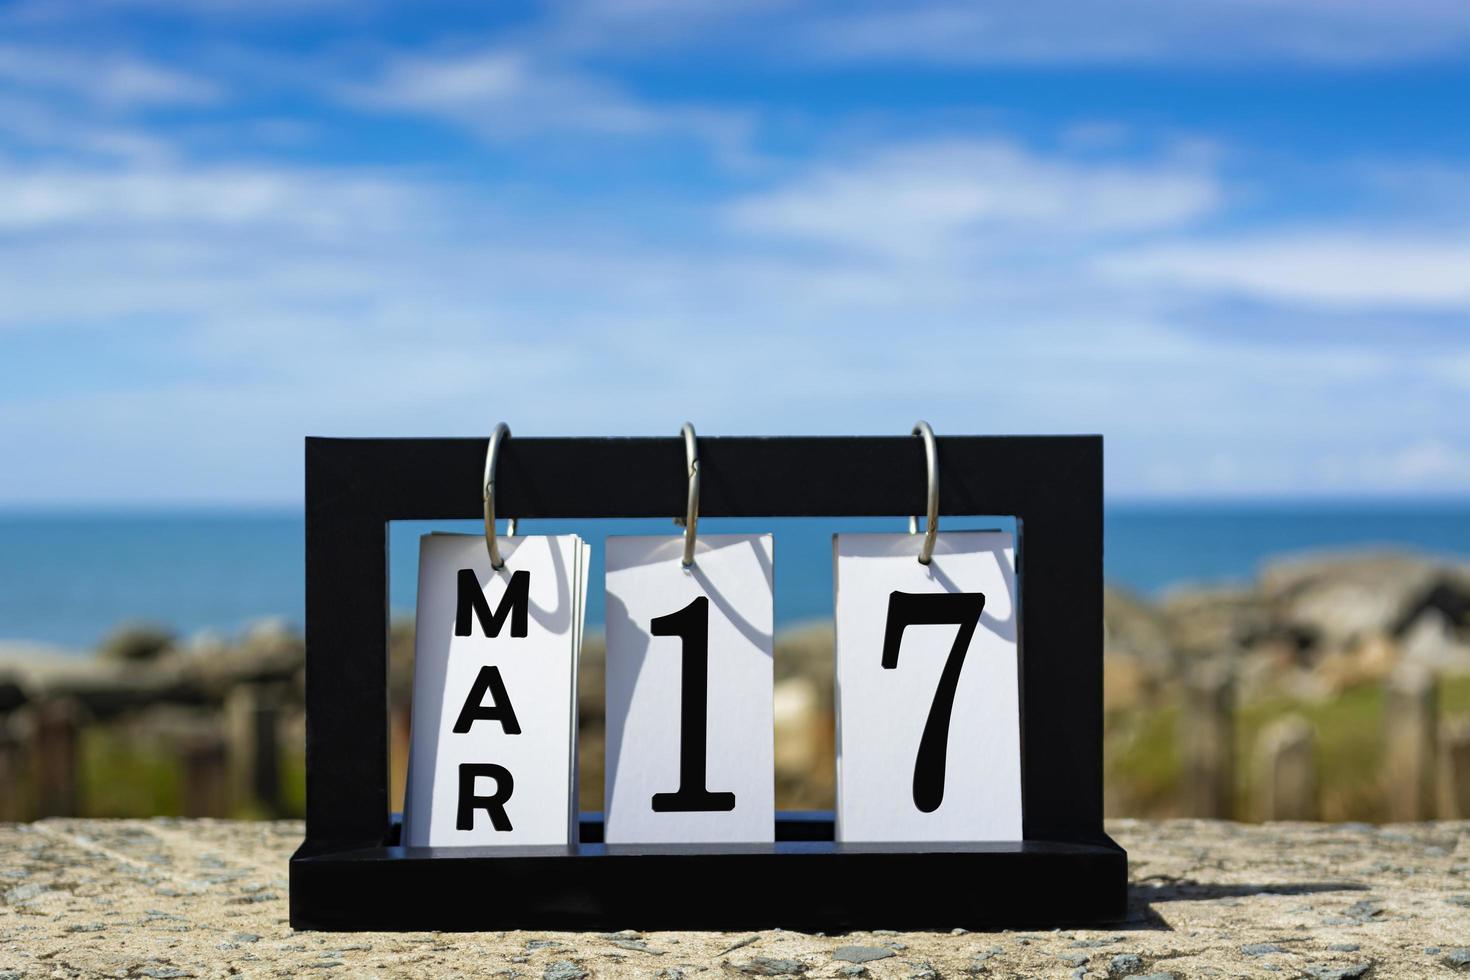 Mar 17 calendar date text on wooden frame with blurred background of ocean. photo